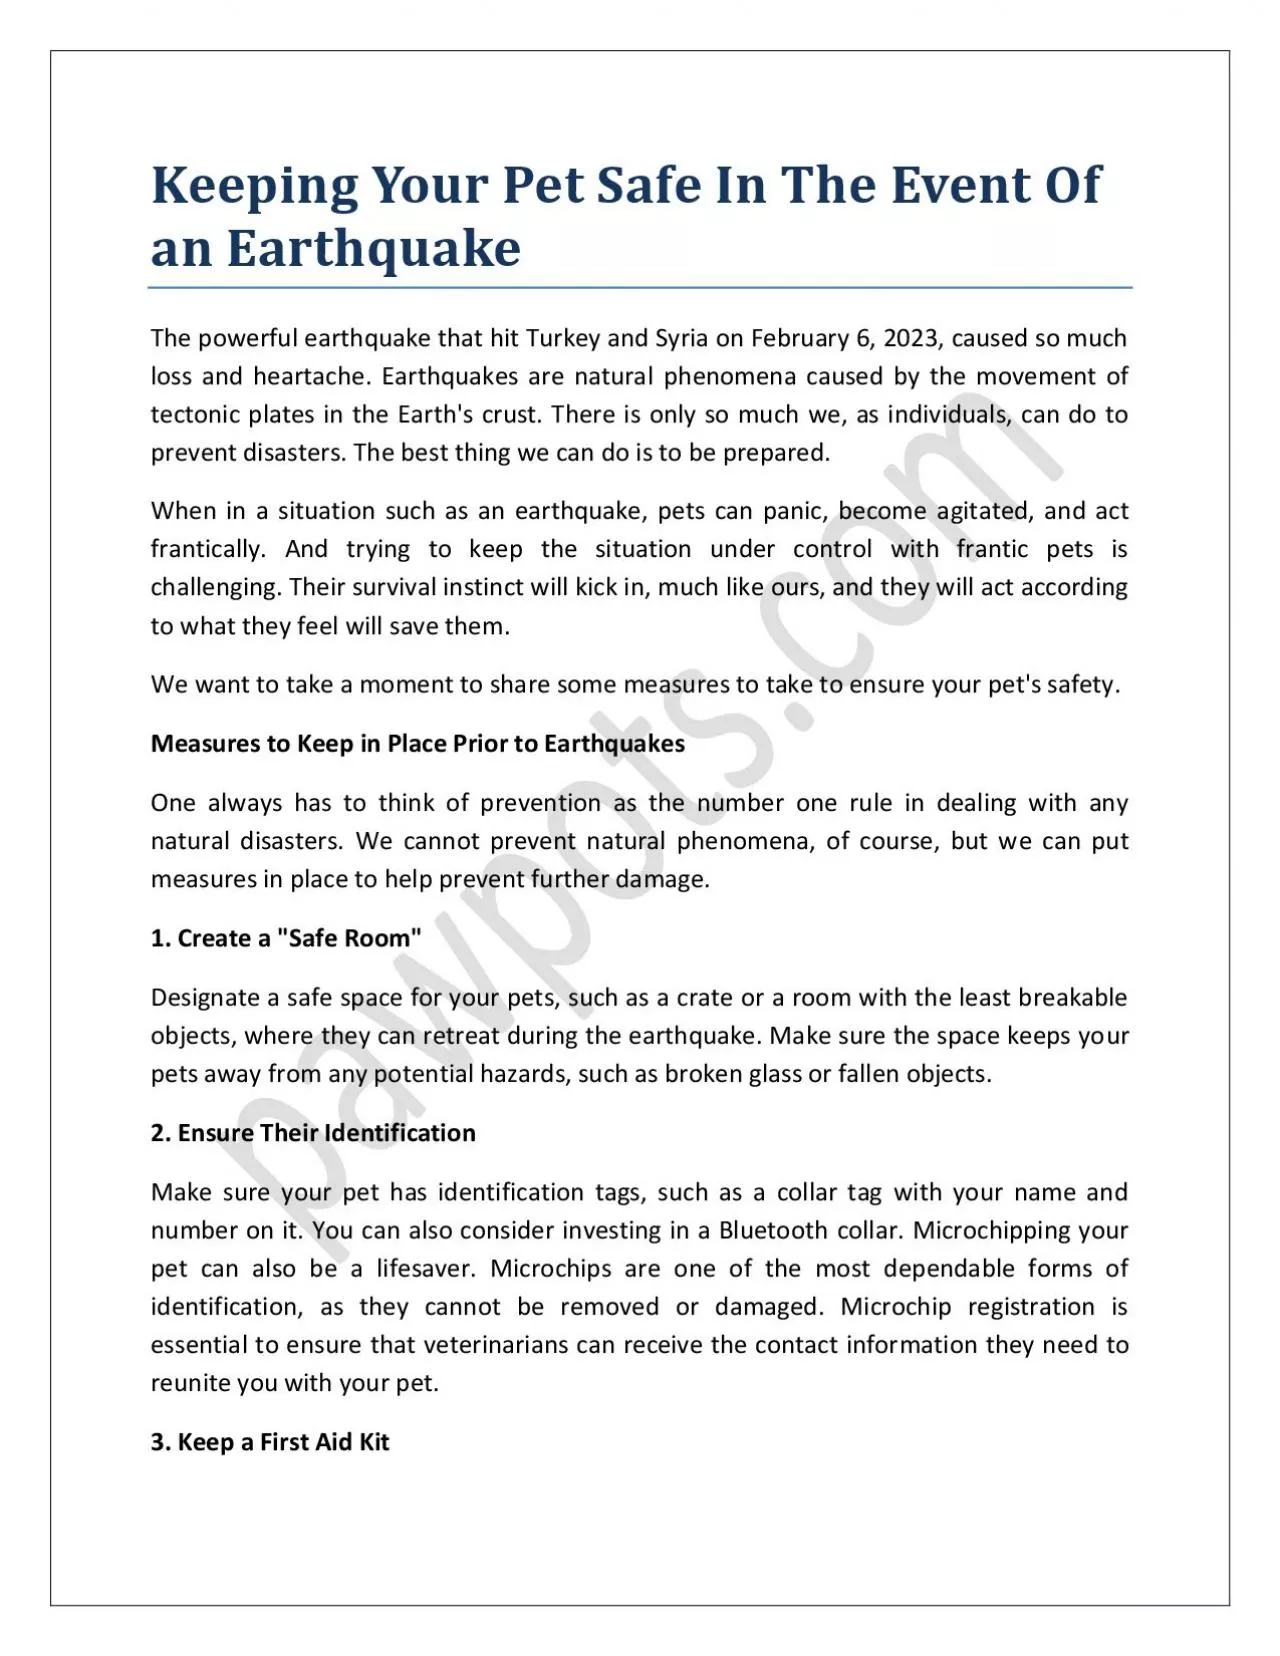 Keeping Your Pet Safe In The Event Of an Earthquake